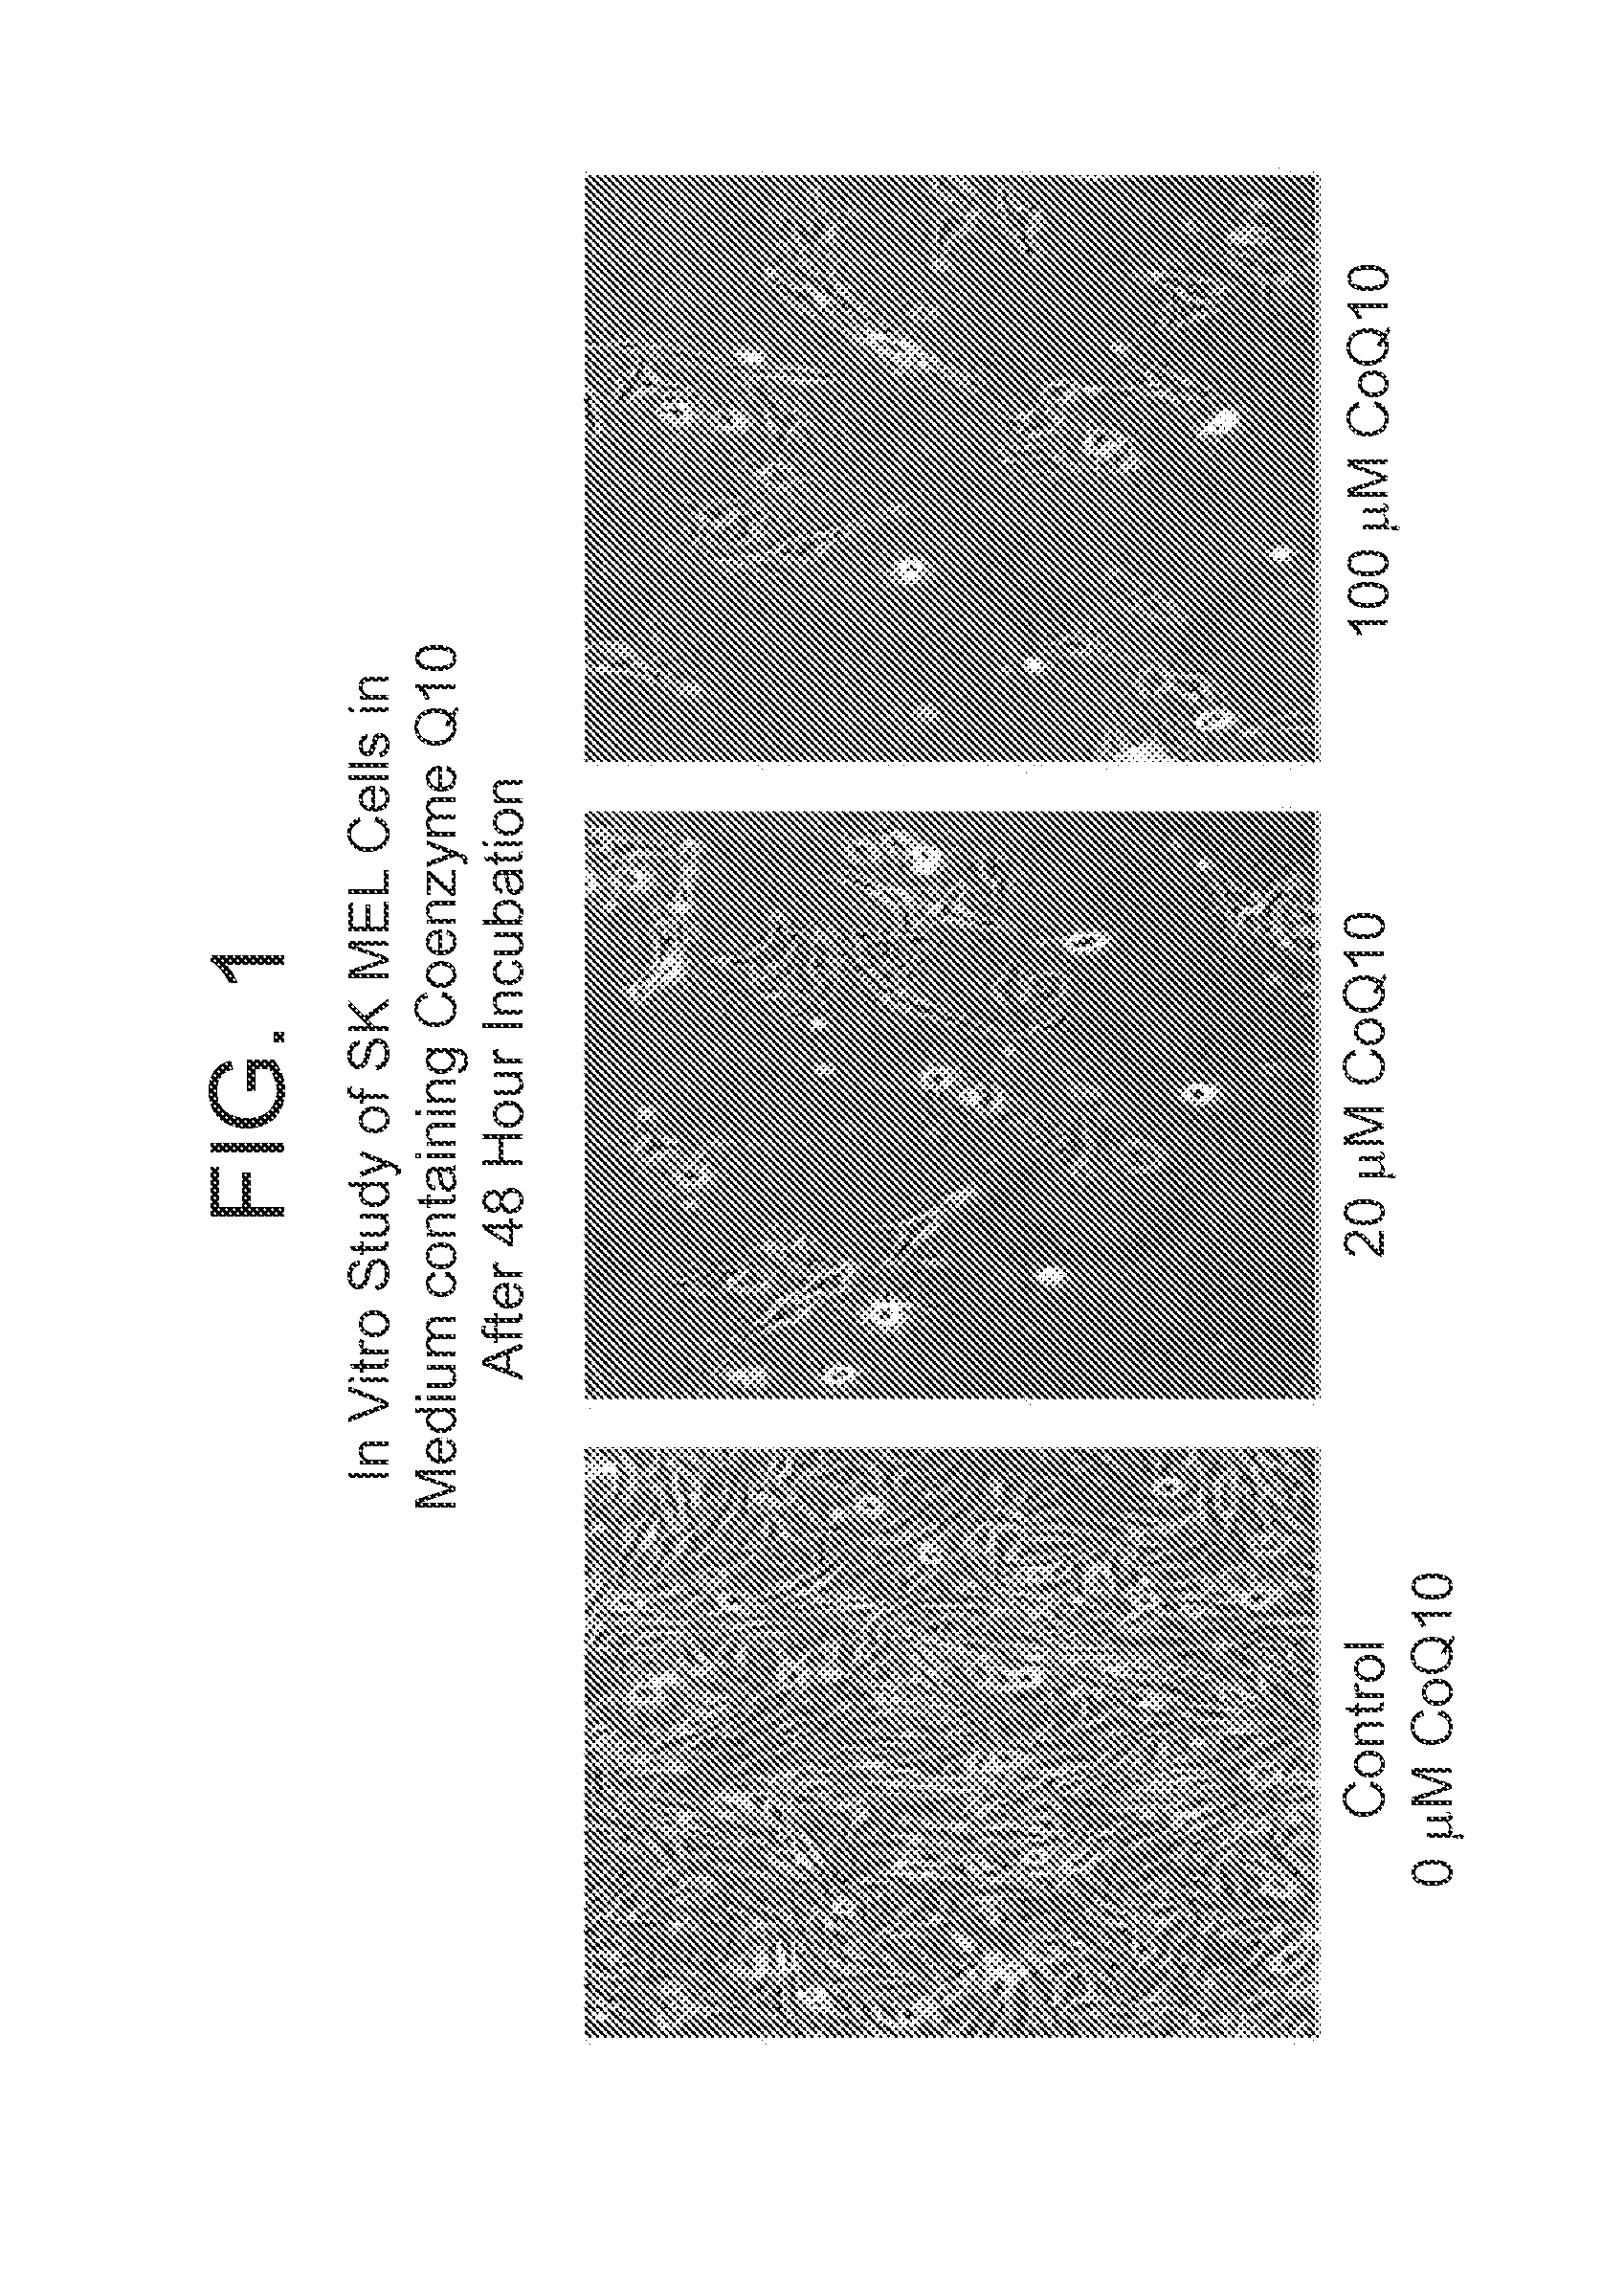 Co-enzyme Q10 formulations and methods of use